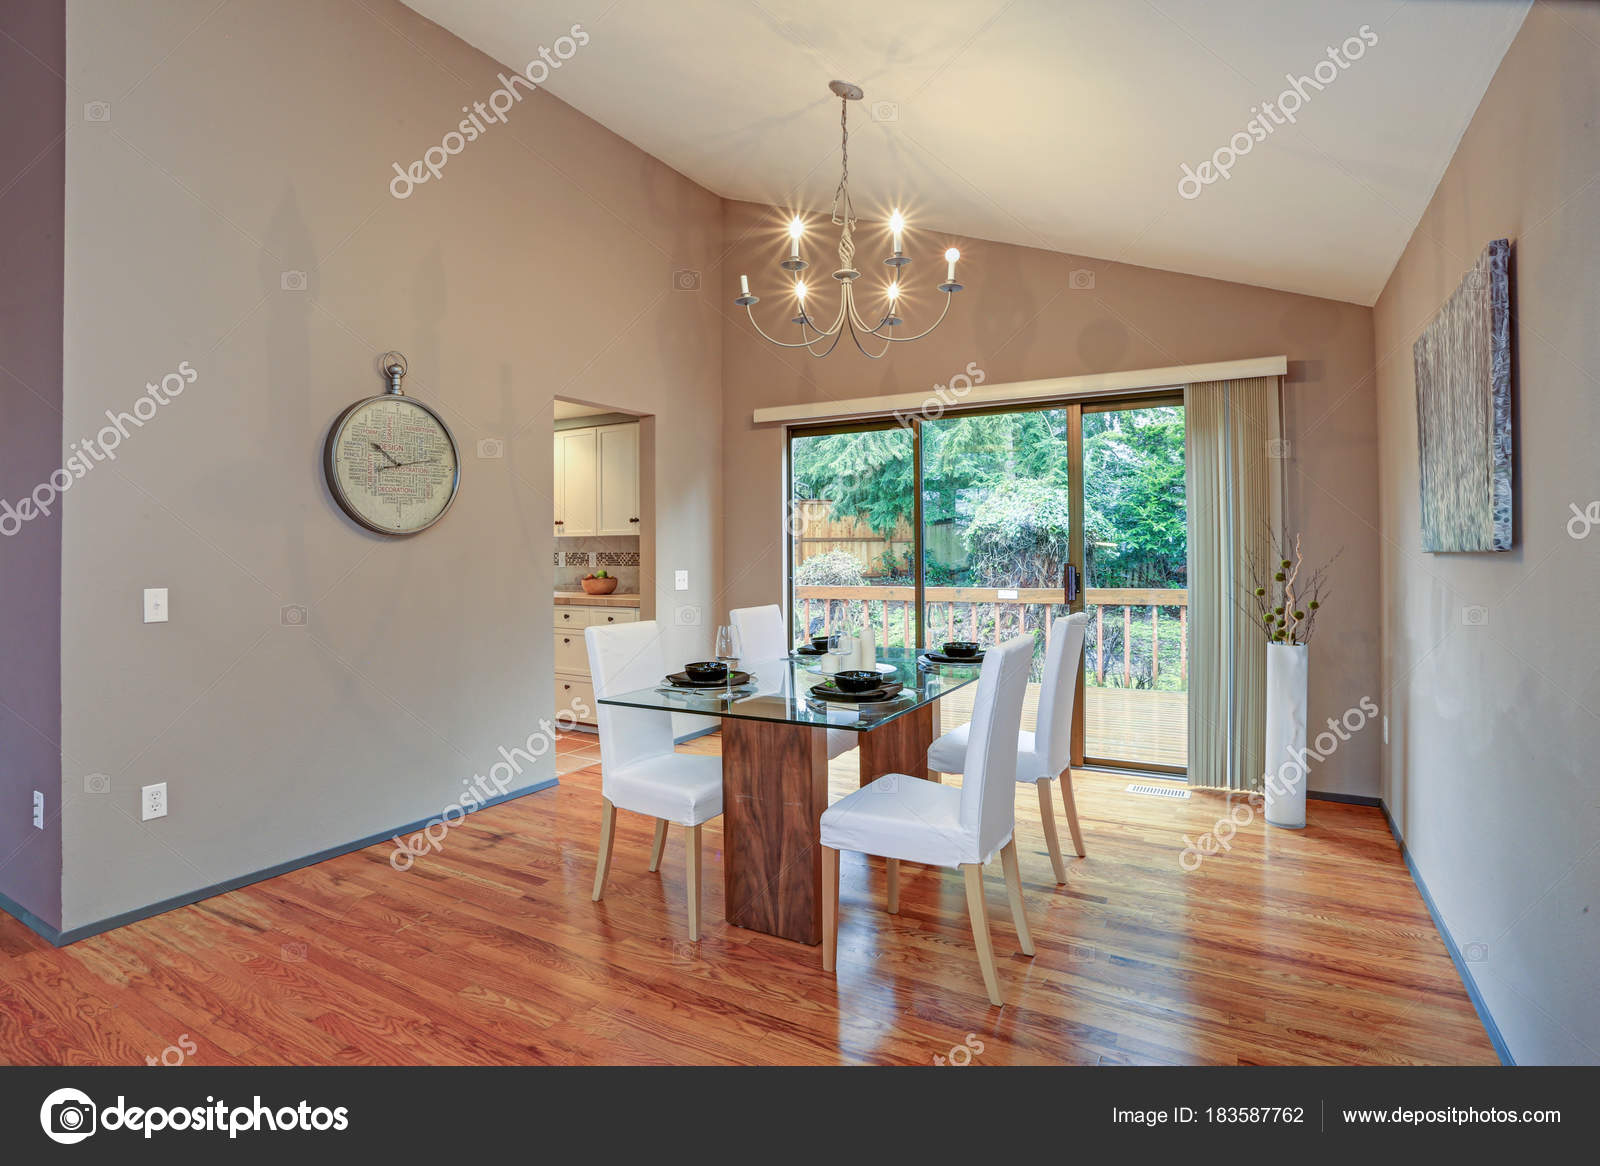 Lovely Spacious Open Floor Plan With Vaulted Ceiling Stock